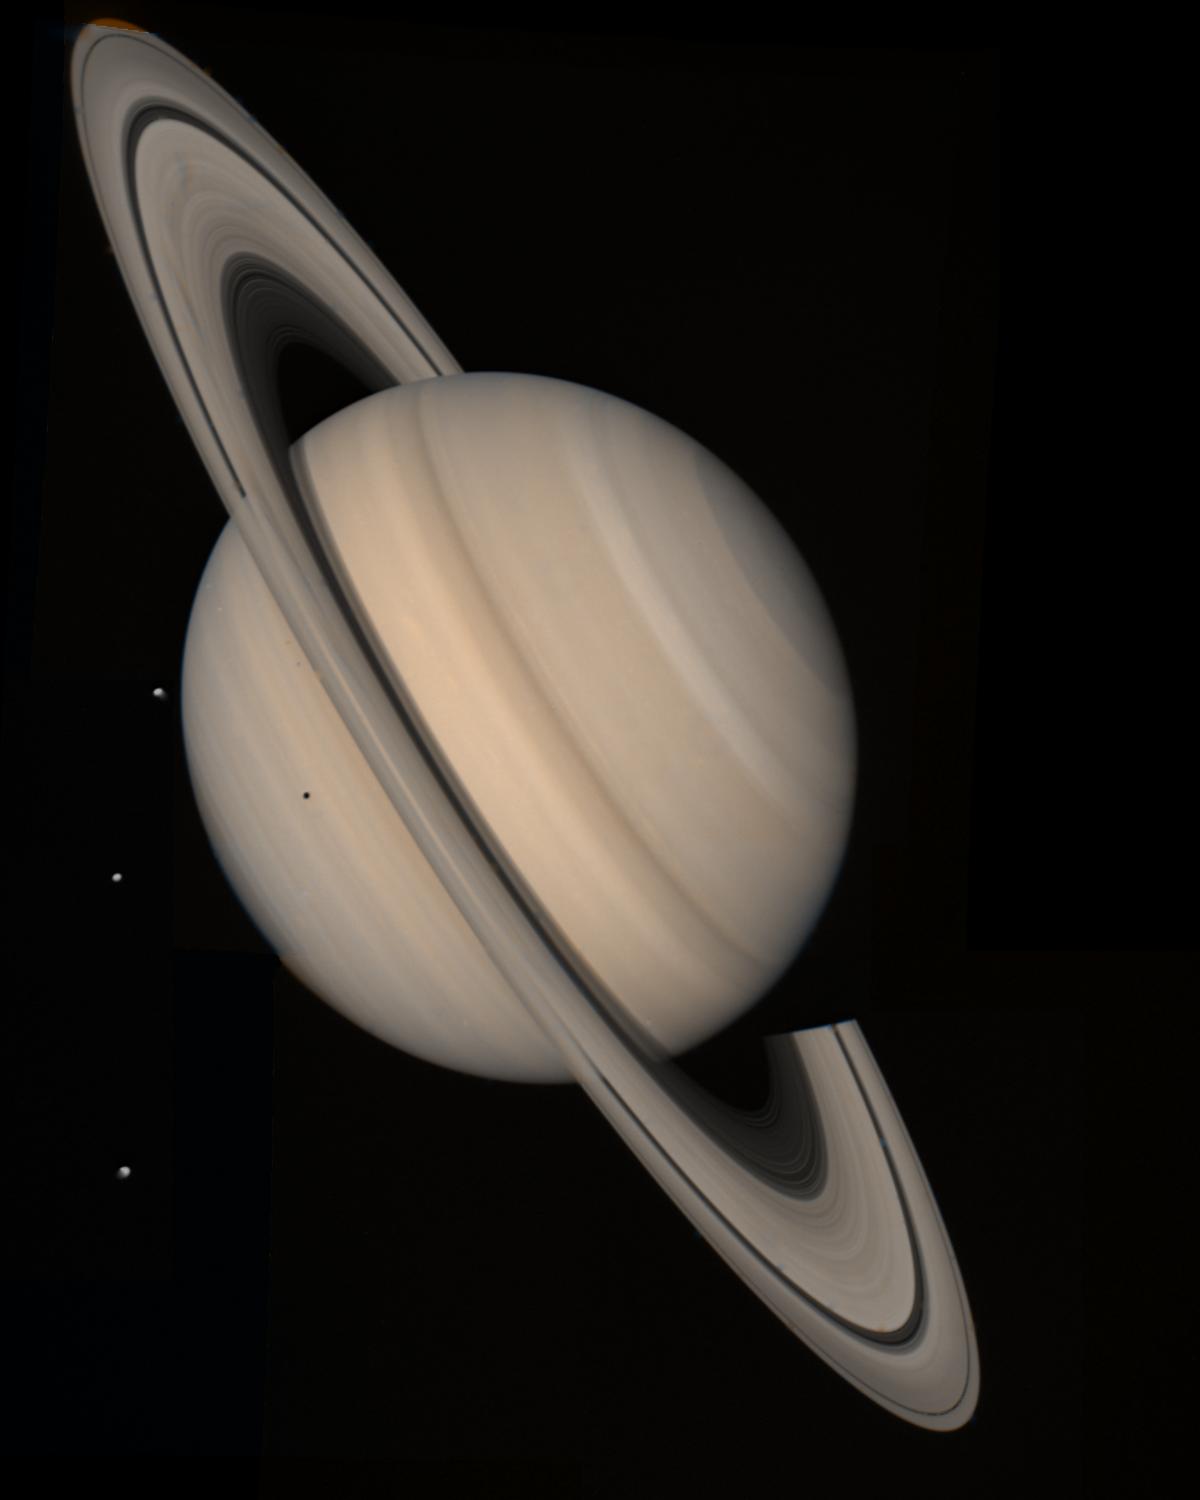 A serene Saturn, encircled by its complex ring system.